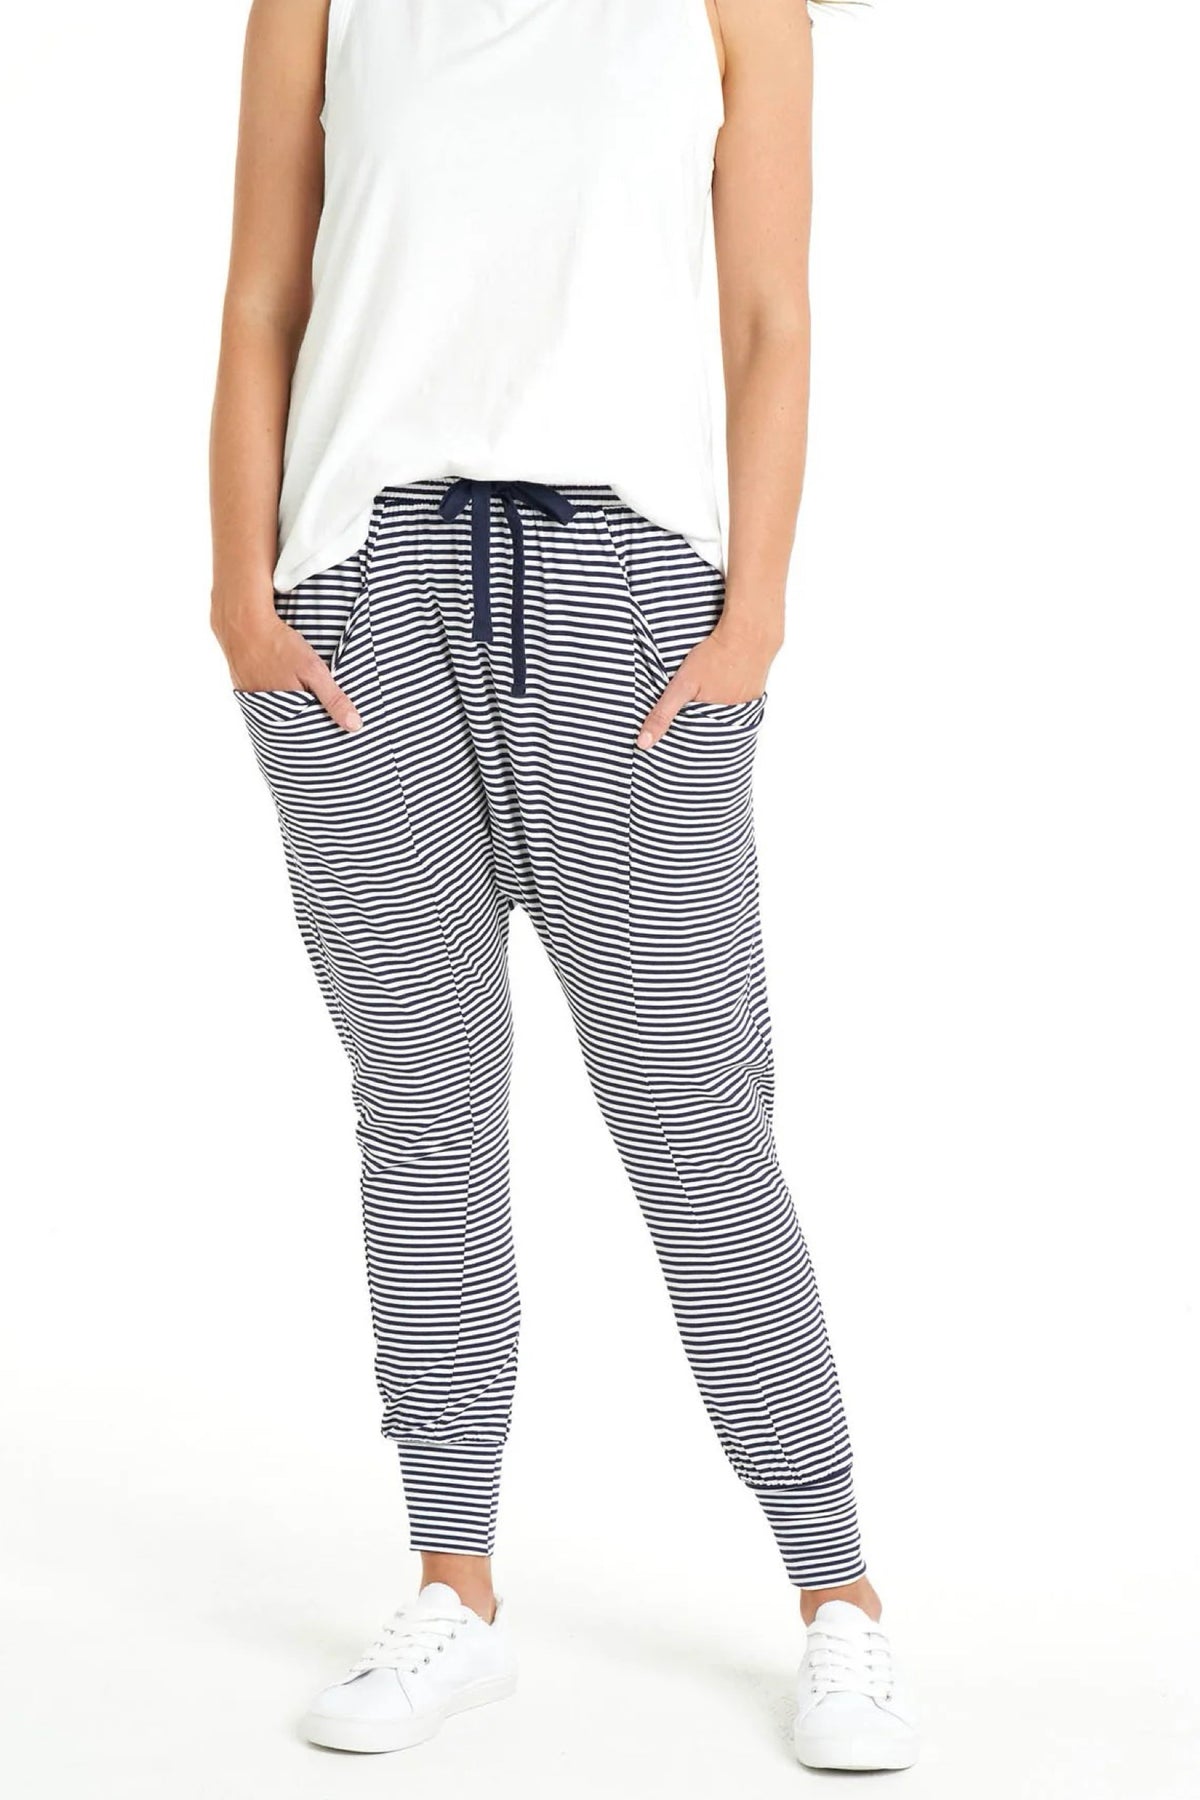 Barcelona Stretchy Relaxed Draped Jogger Pant Navy Blue/White Stripe